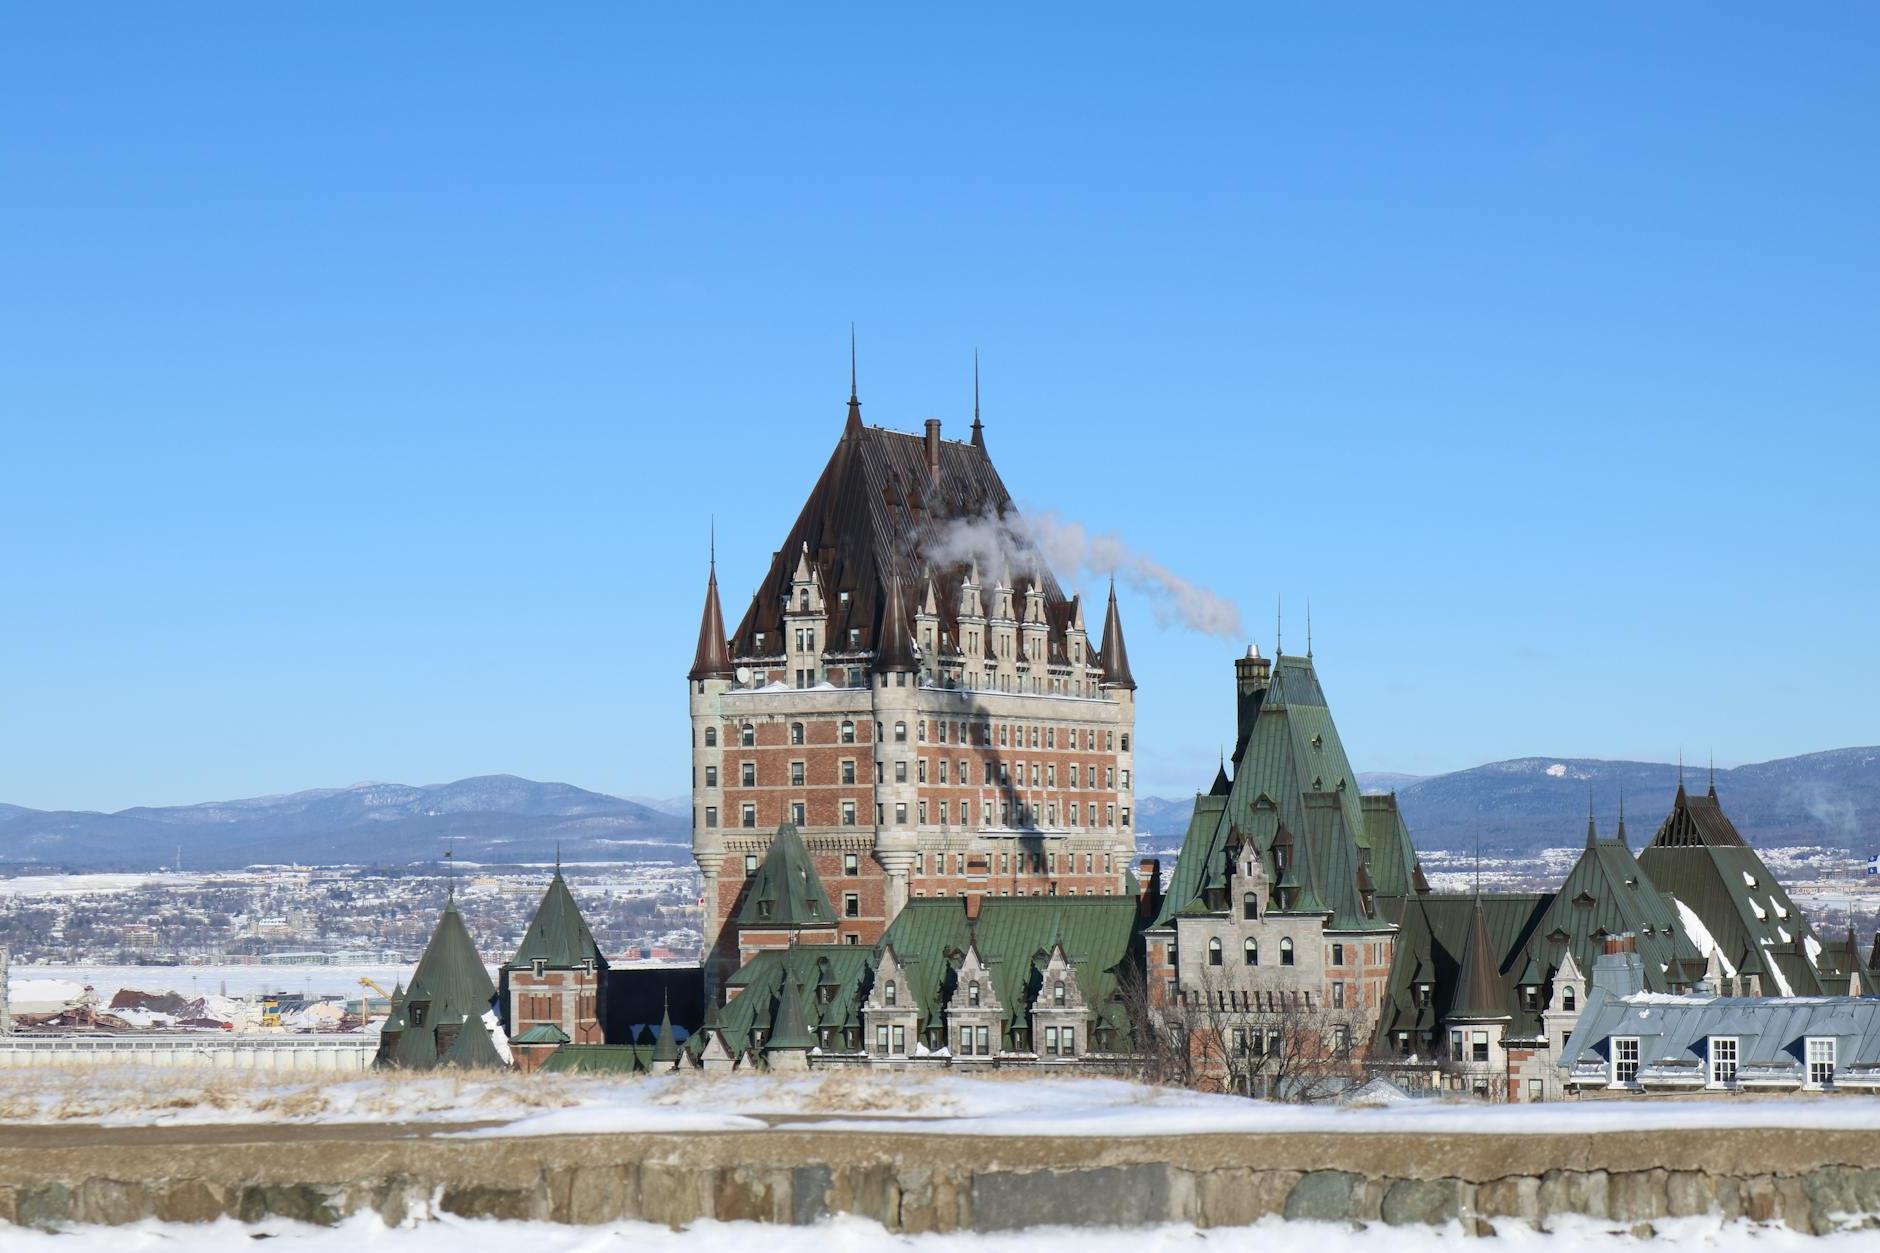 Le Chateau Frontenac in Quebec City, Quebec at Winter